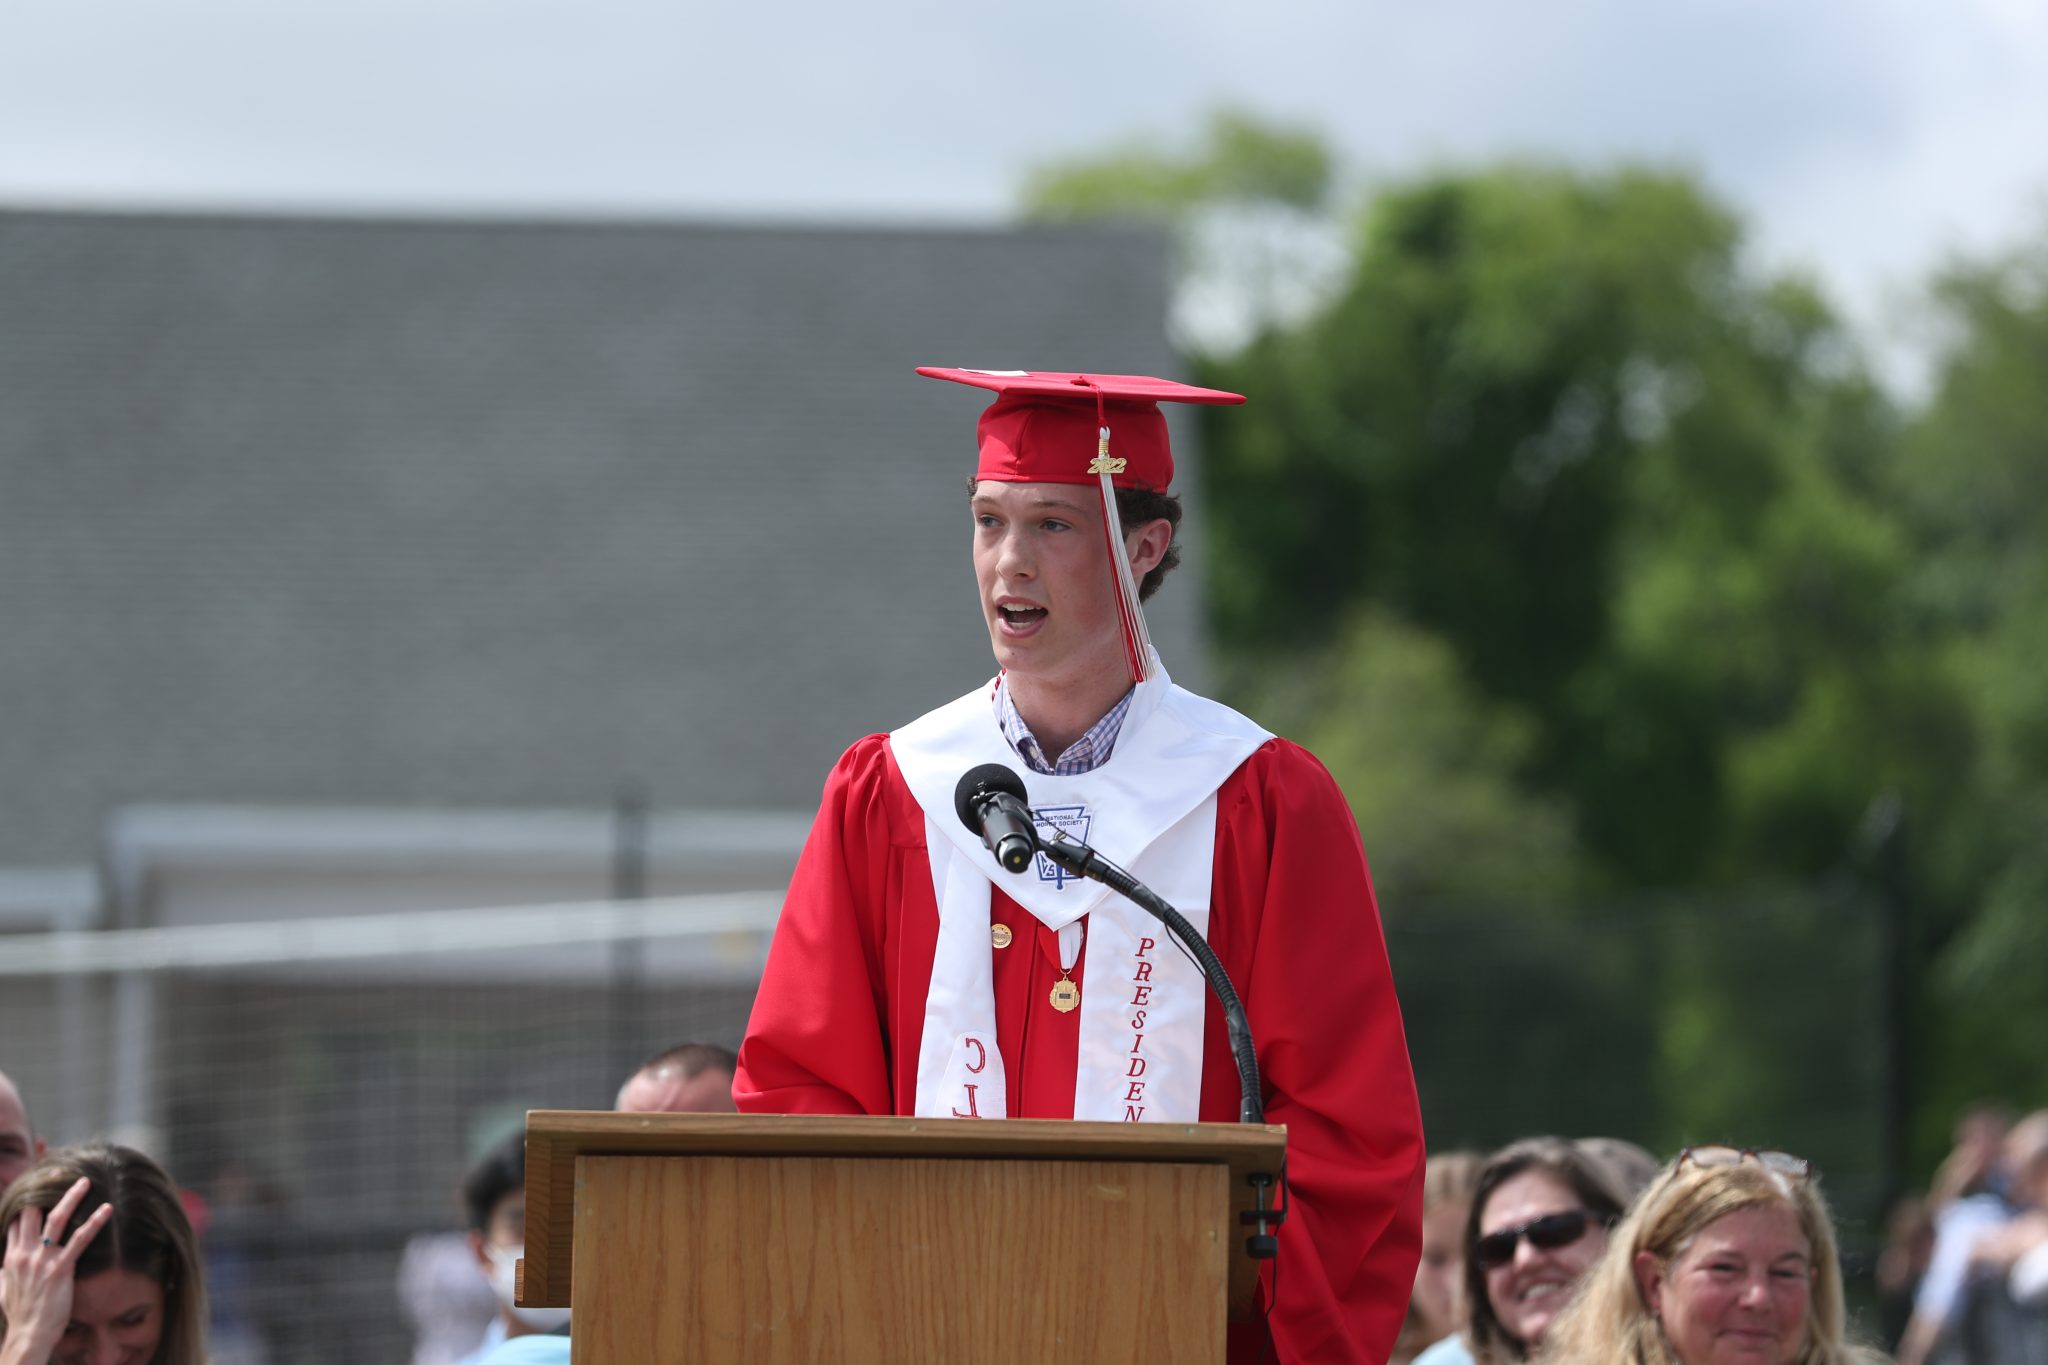 Class President Luke MacDonald was the final speaker of the morning reflecting on how he always knew he wanted to lead this class. 